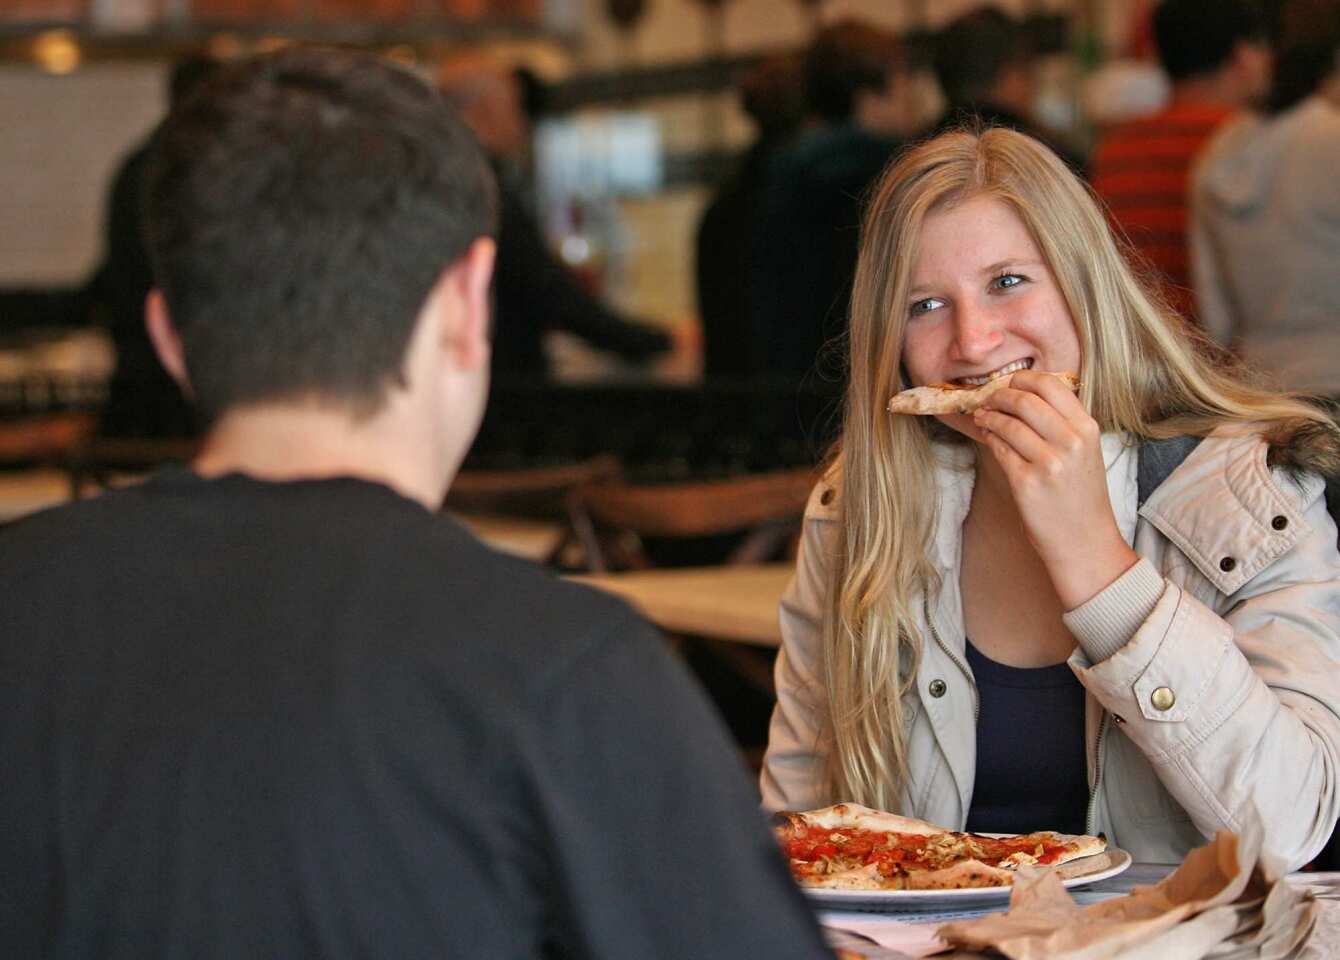 800 Degrees Neapolitan Pizzeria in Westwood Village: UCLA students Sam Zabb, left, and Laura Gustafson, right enjoy the pizza.